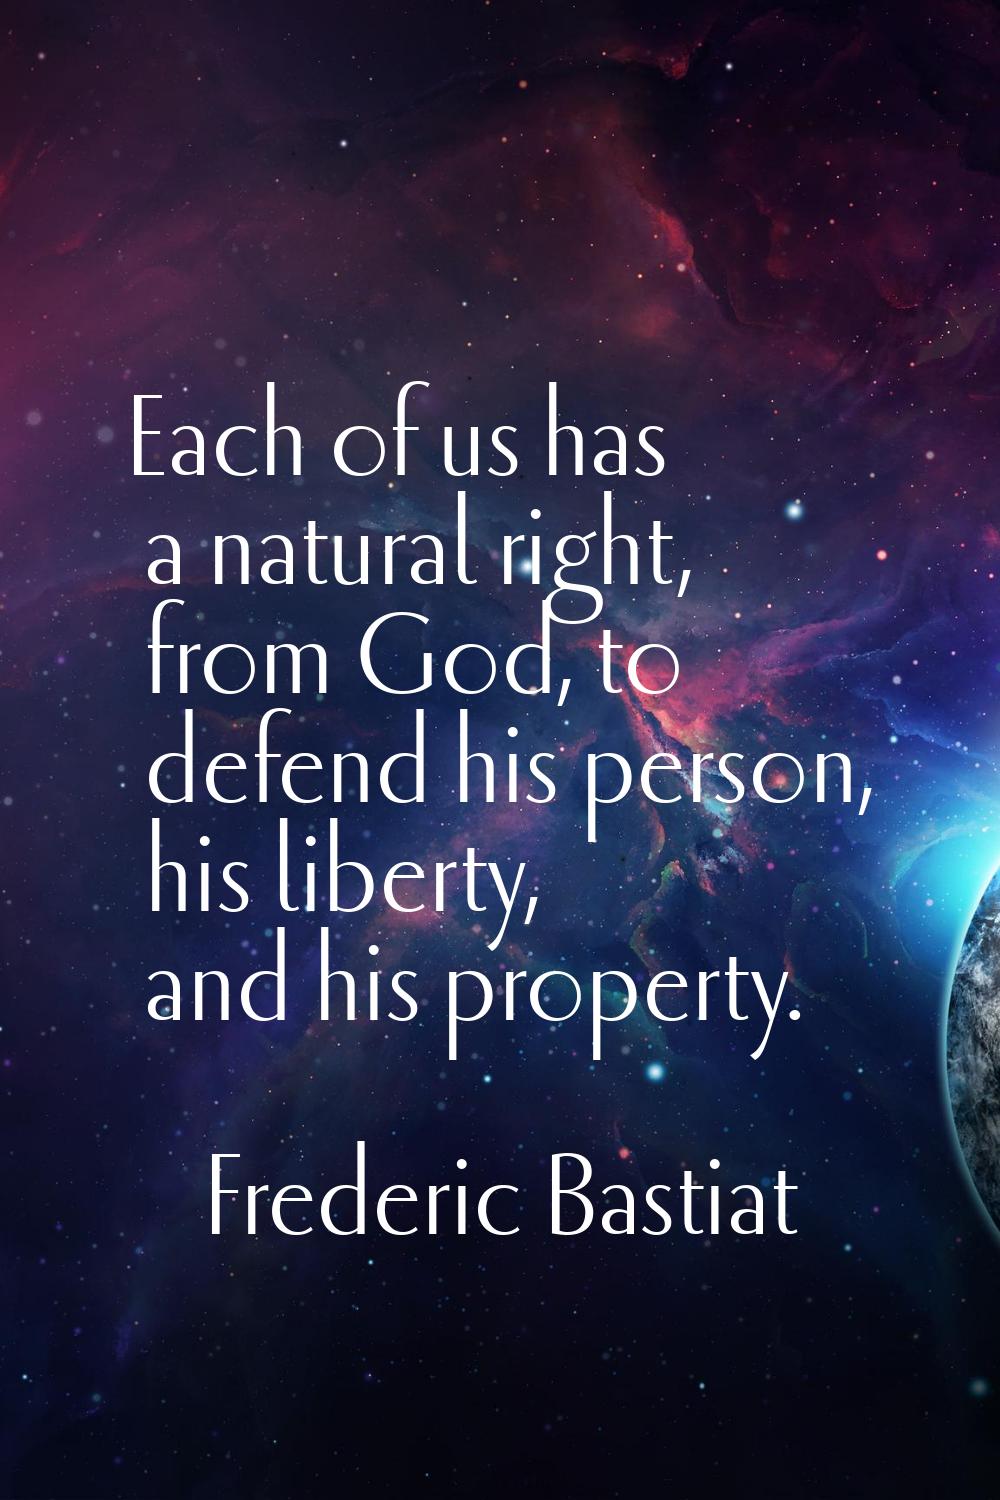 Each of us has a natural right, from God, to defend his person, his liberty, and his property.